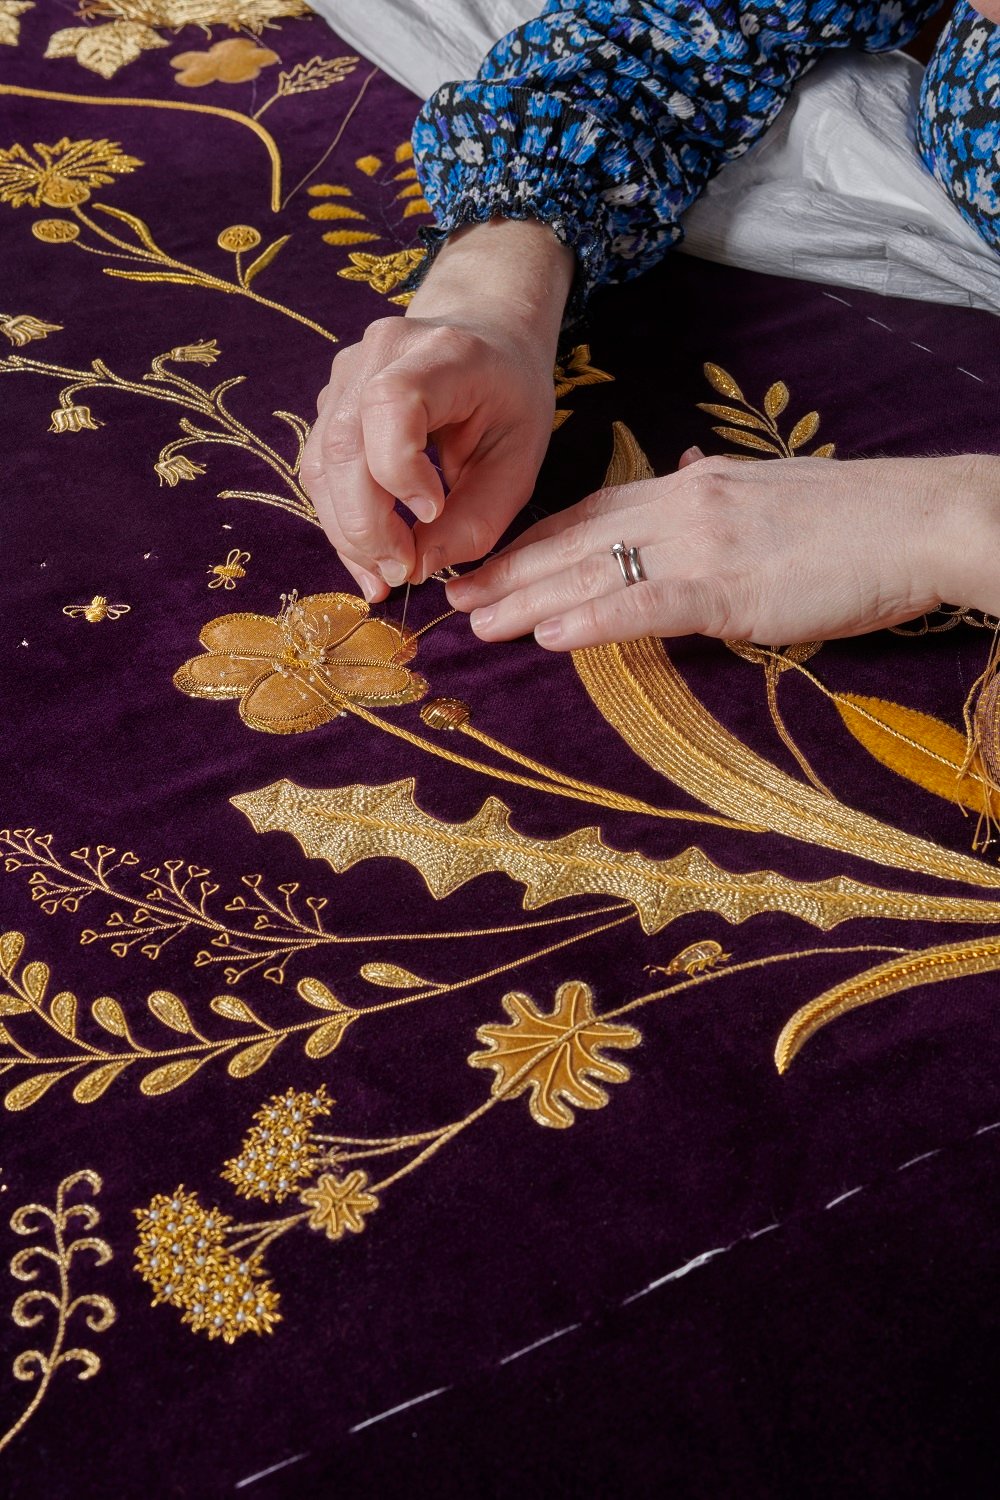 Royal School of Needlework working on Queen Camilla's Robe of Estate